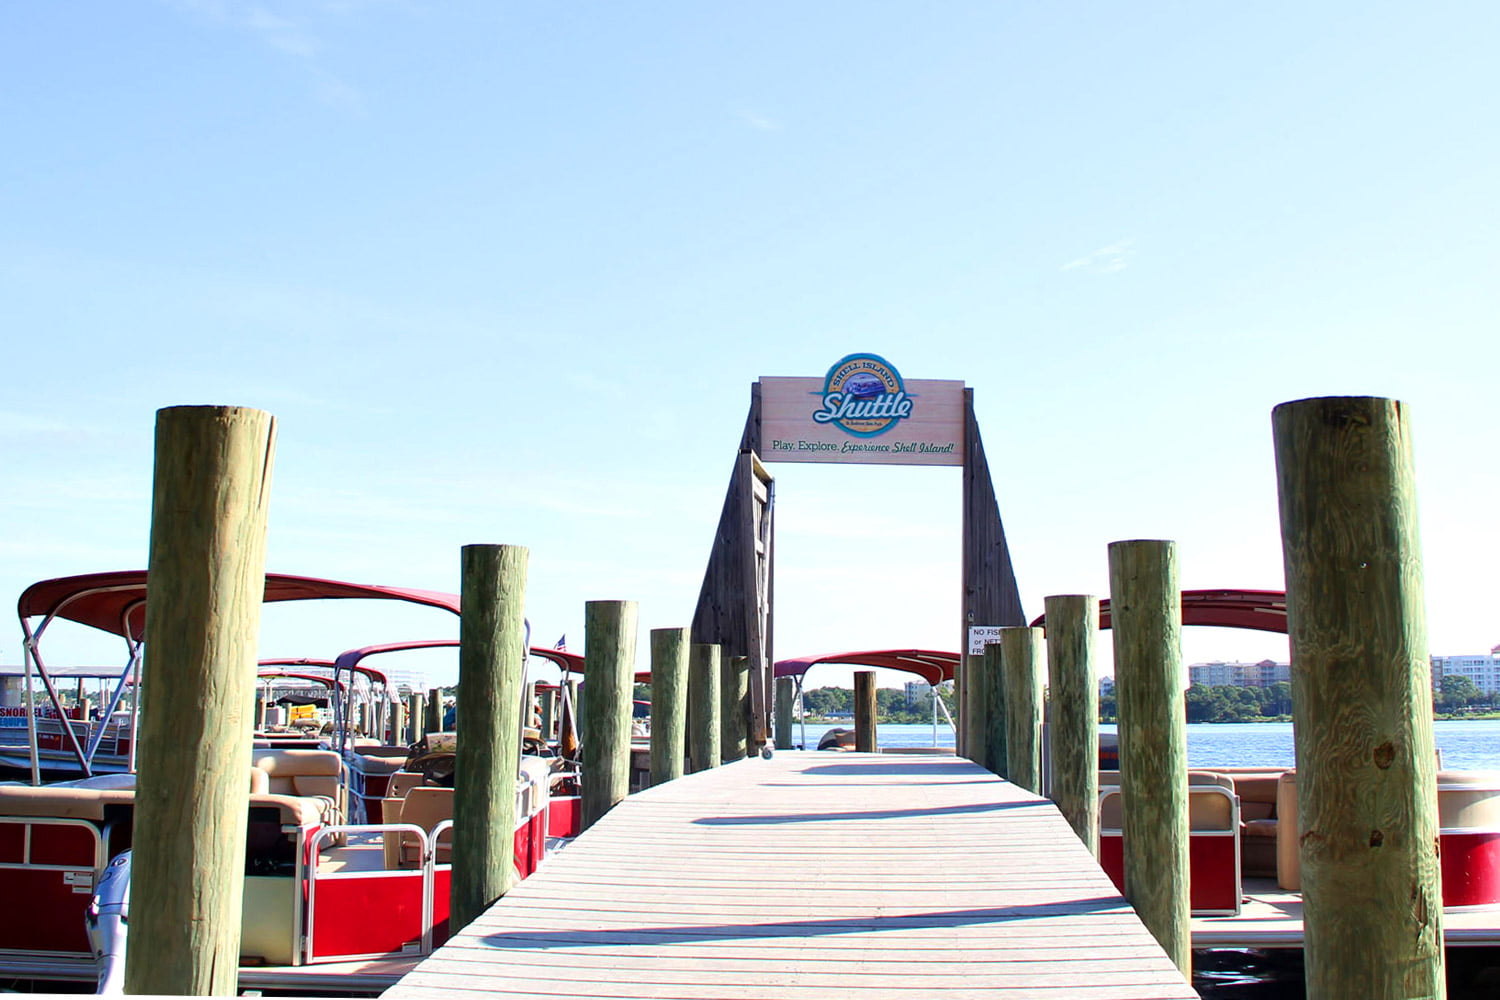 Why rent a pontoon boat in panama city beach?